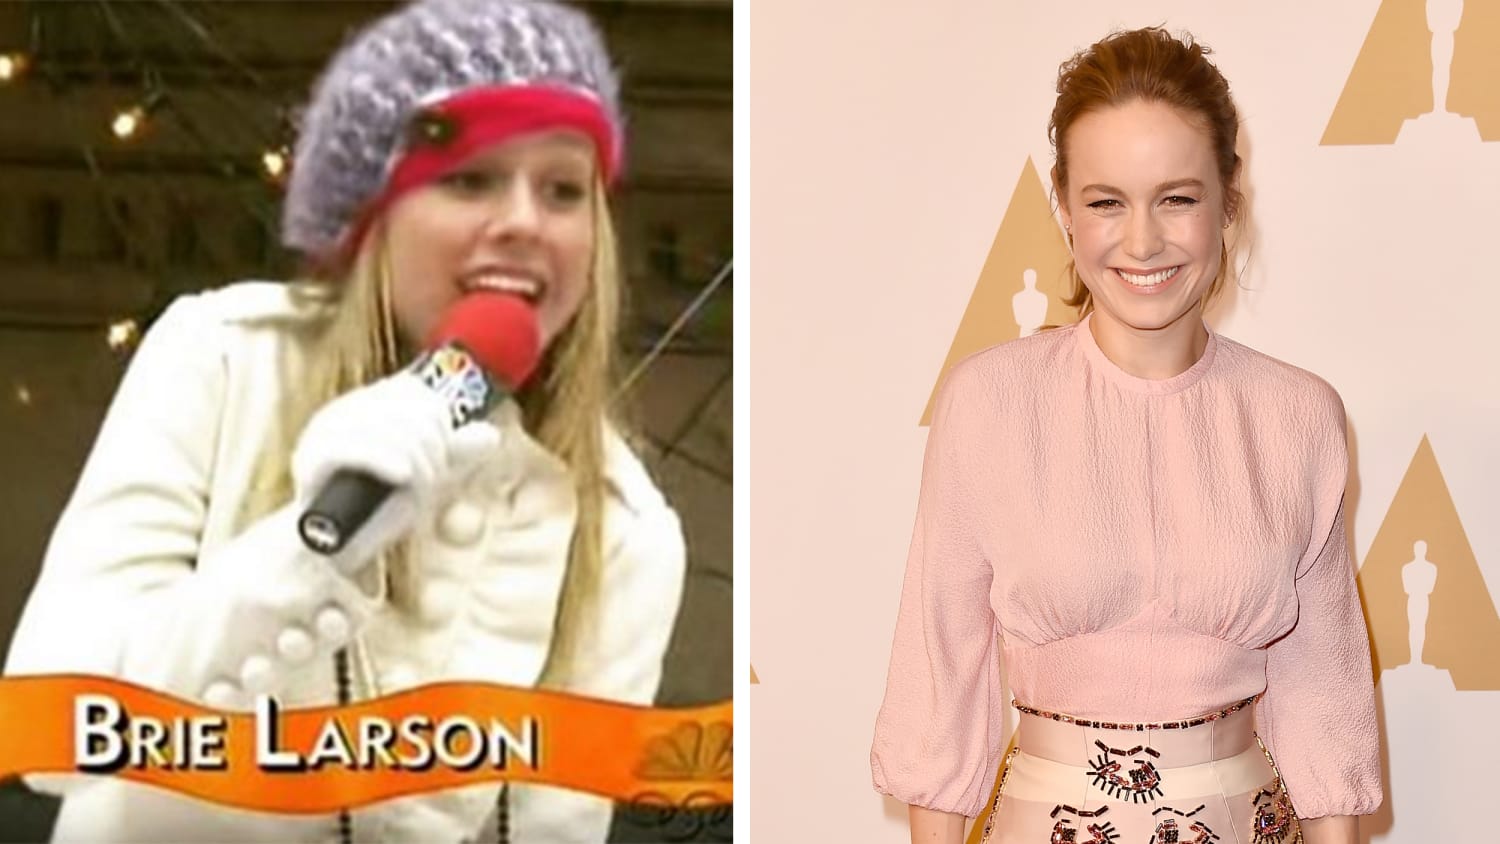 Brie Larson rides a Barbie Thanksgiving parade in throwback pic